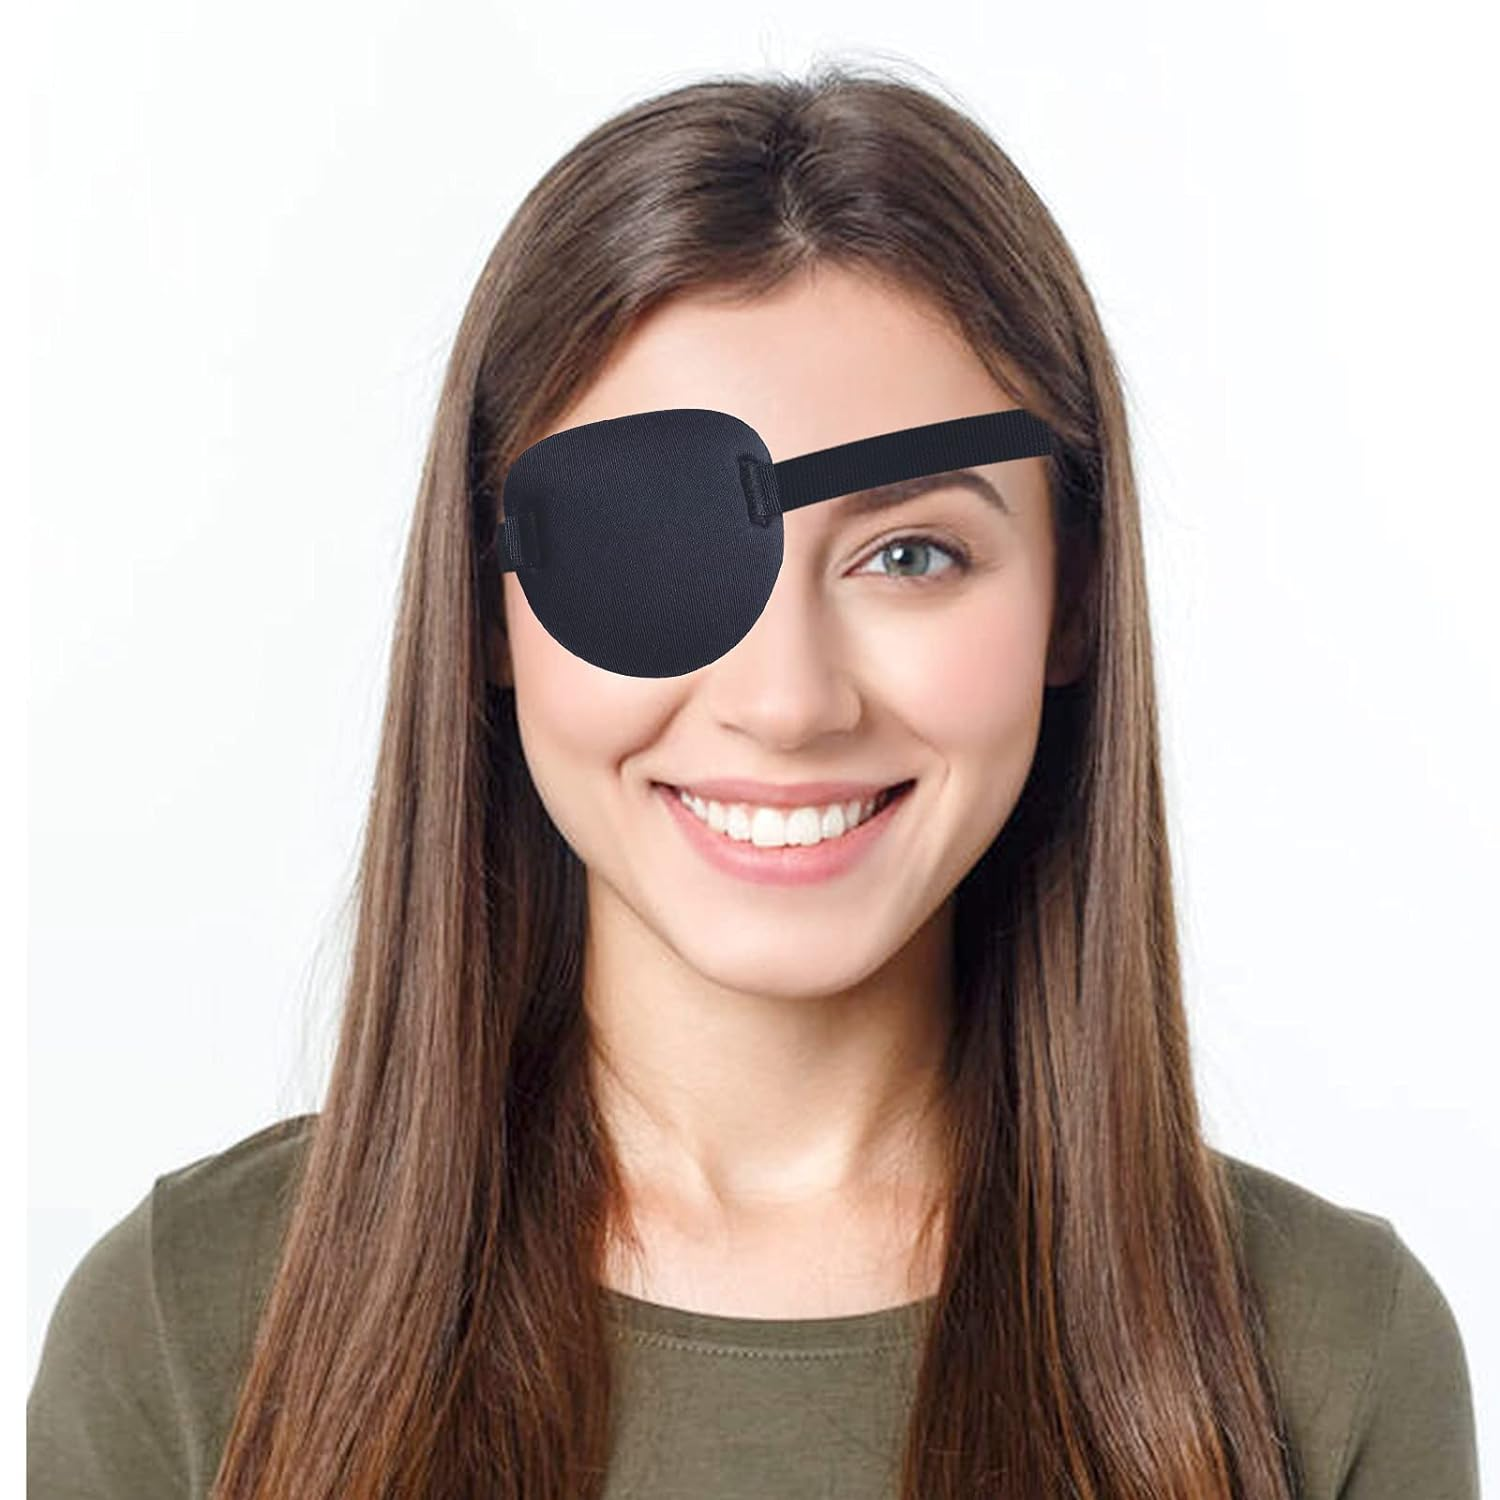 Picture showing  a lady rocking an eye patch